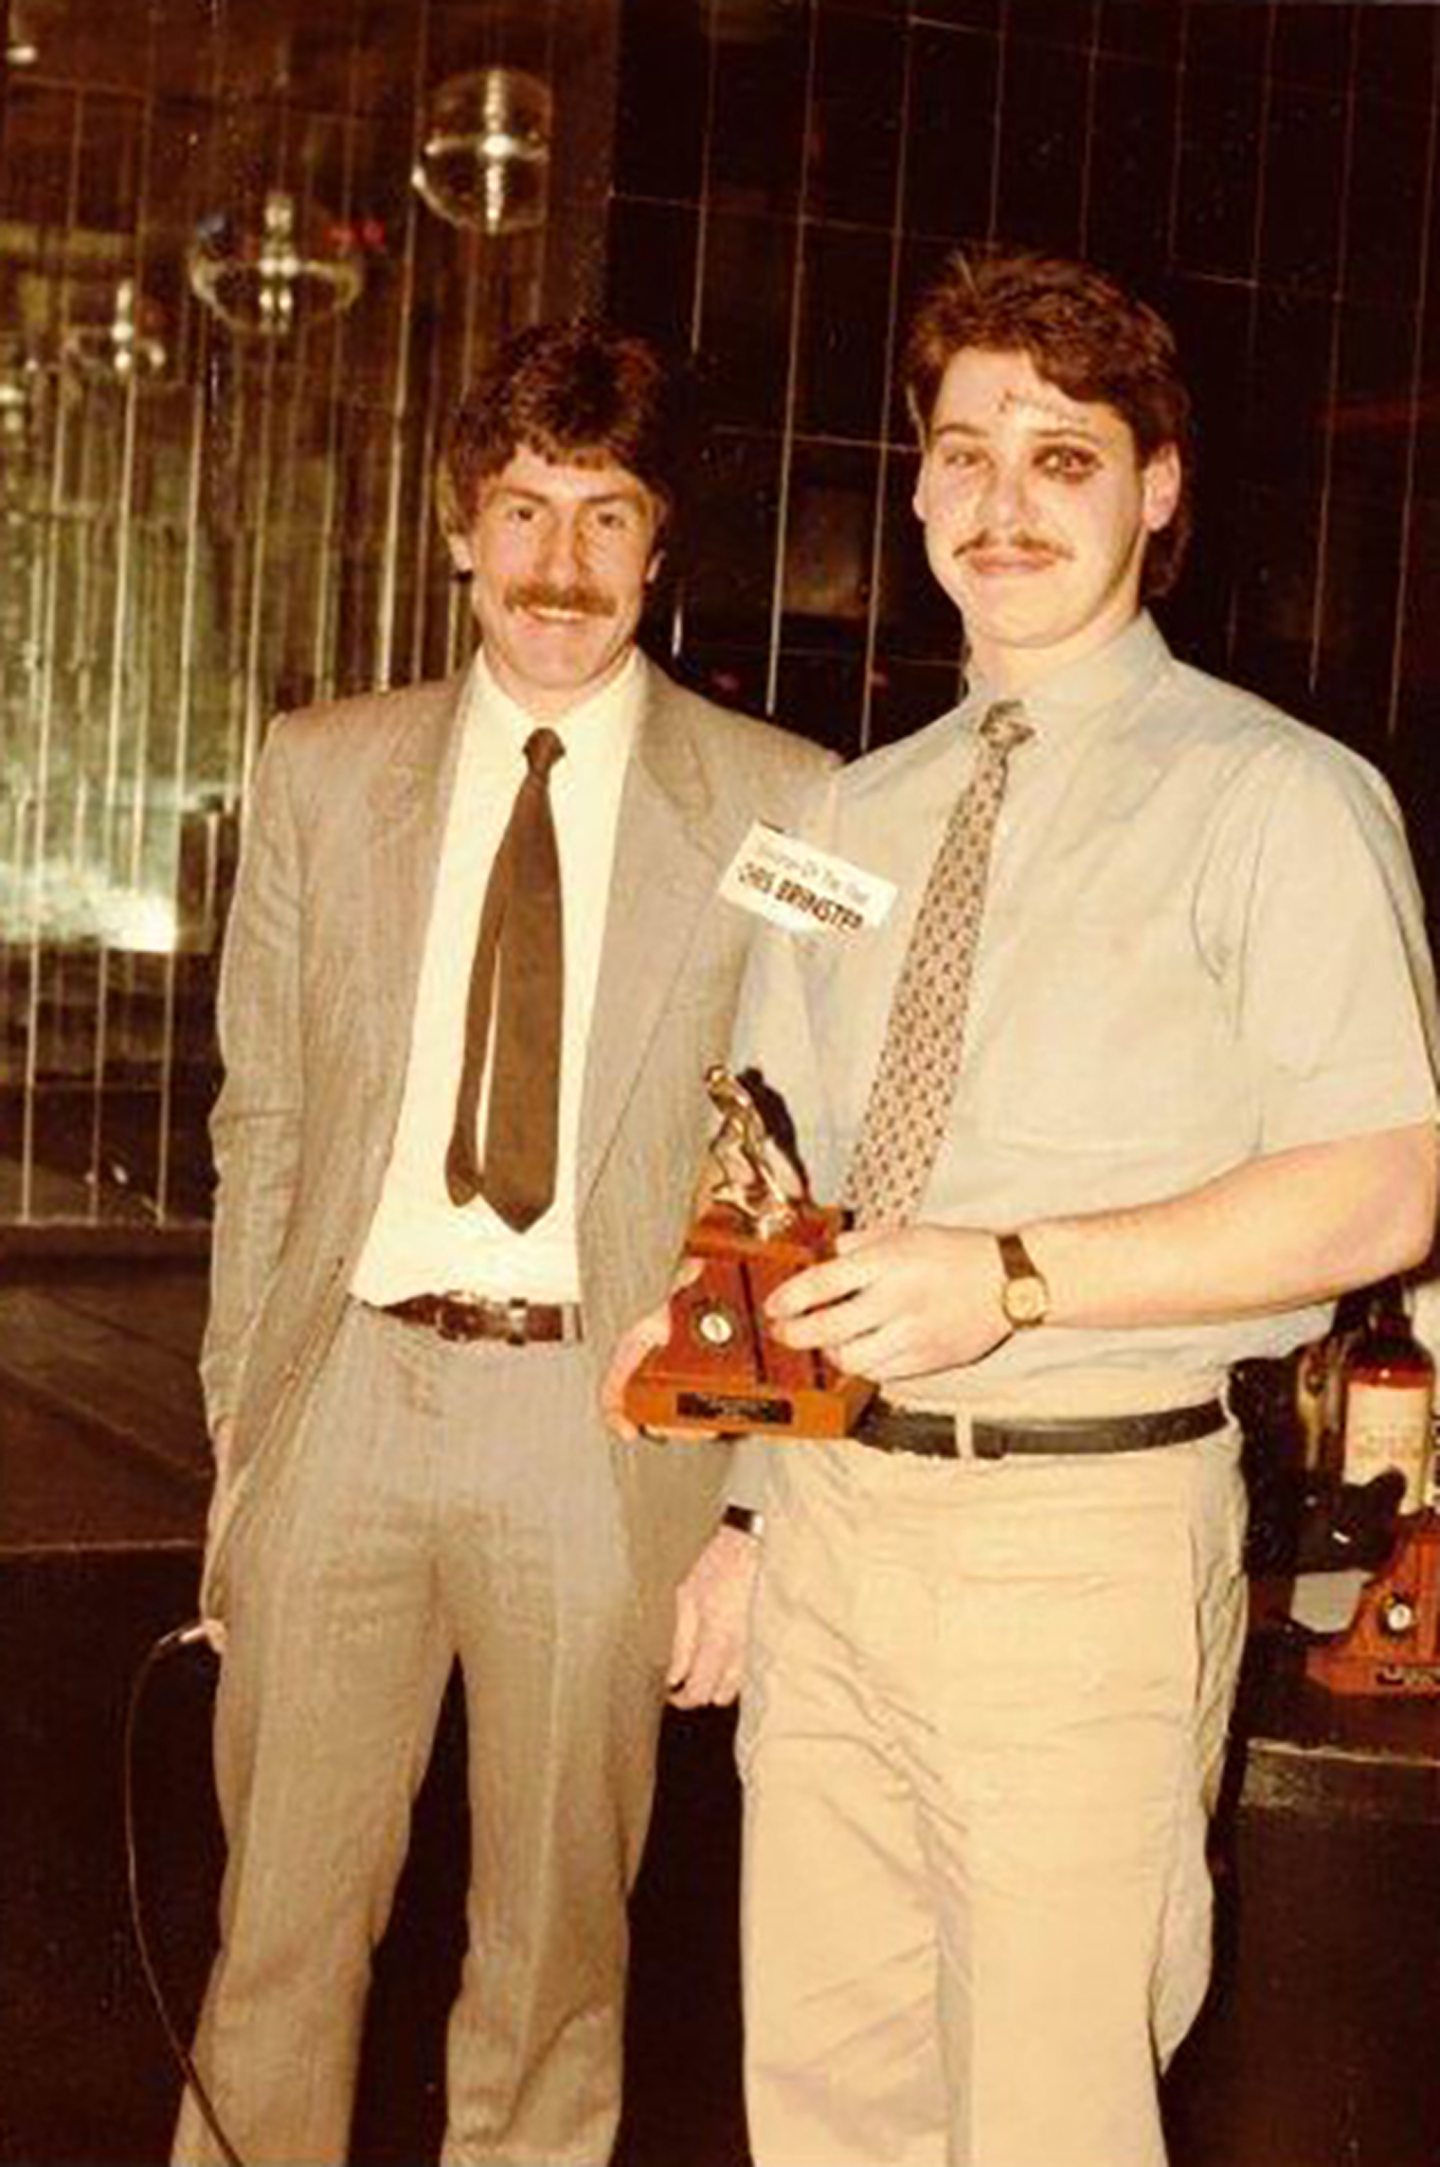 Dundee United goalkeeper Hamish McAlpine with Chris and his black eye in 1984. 